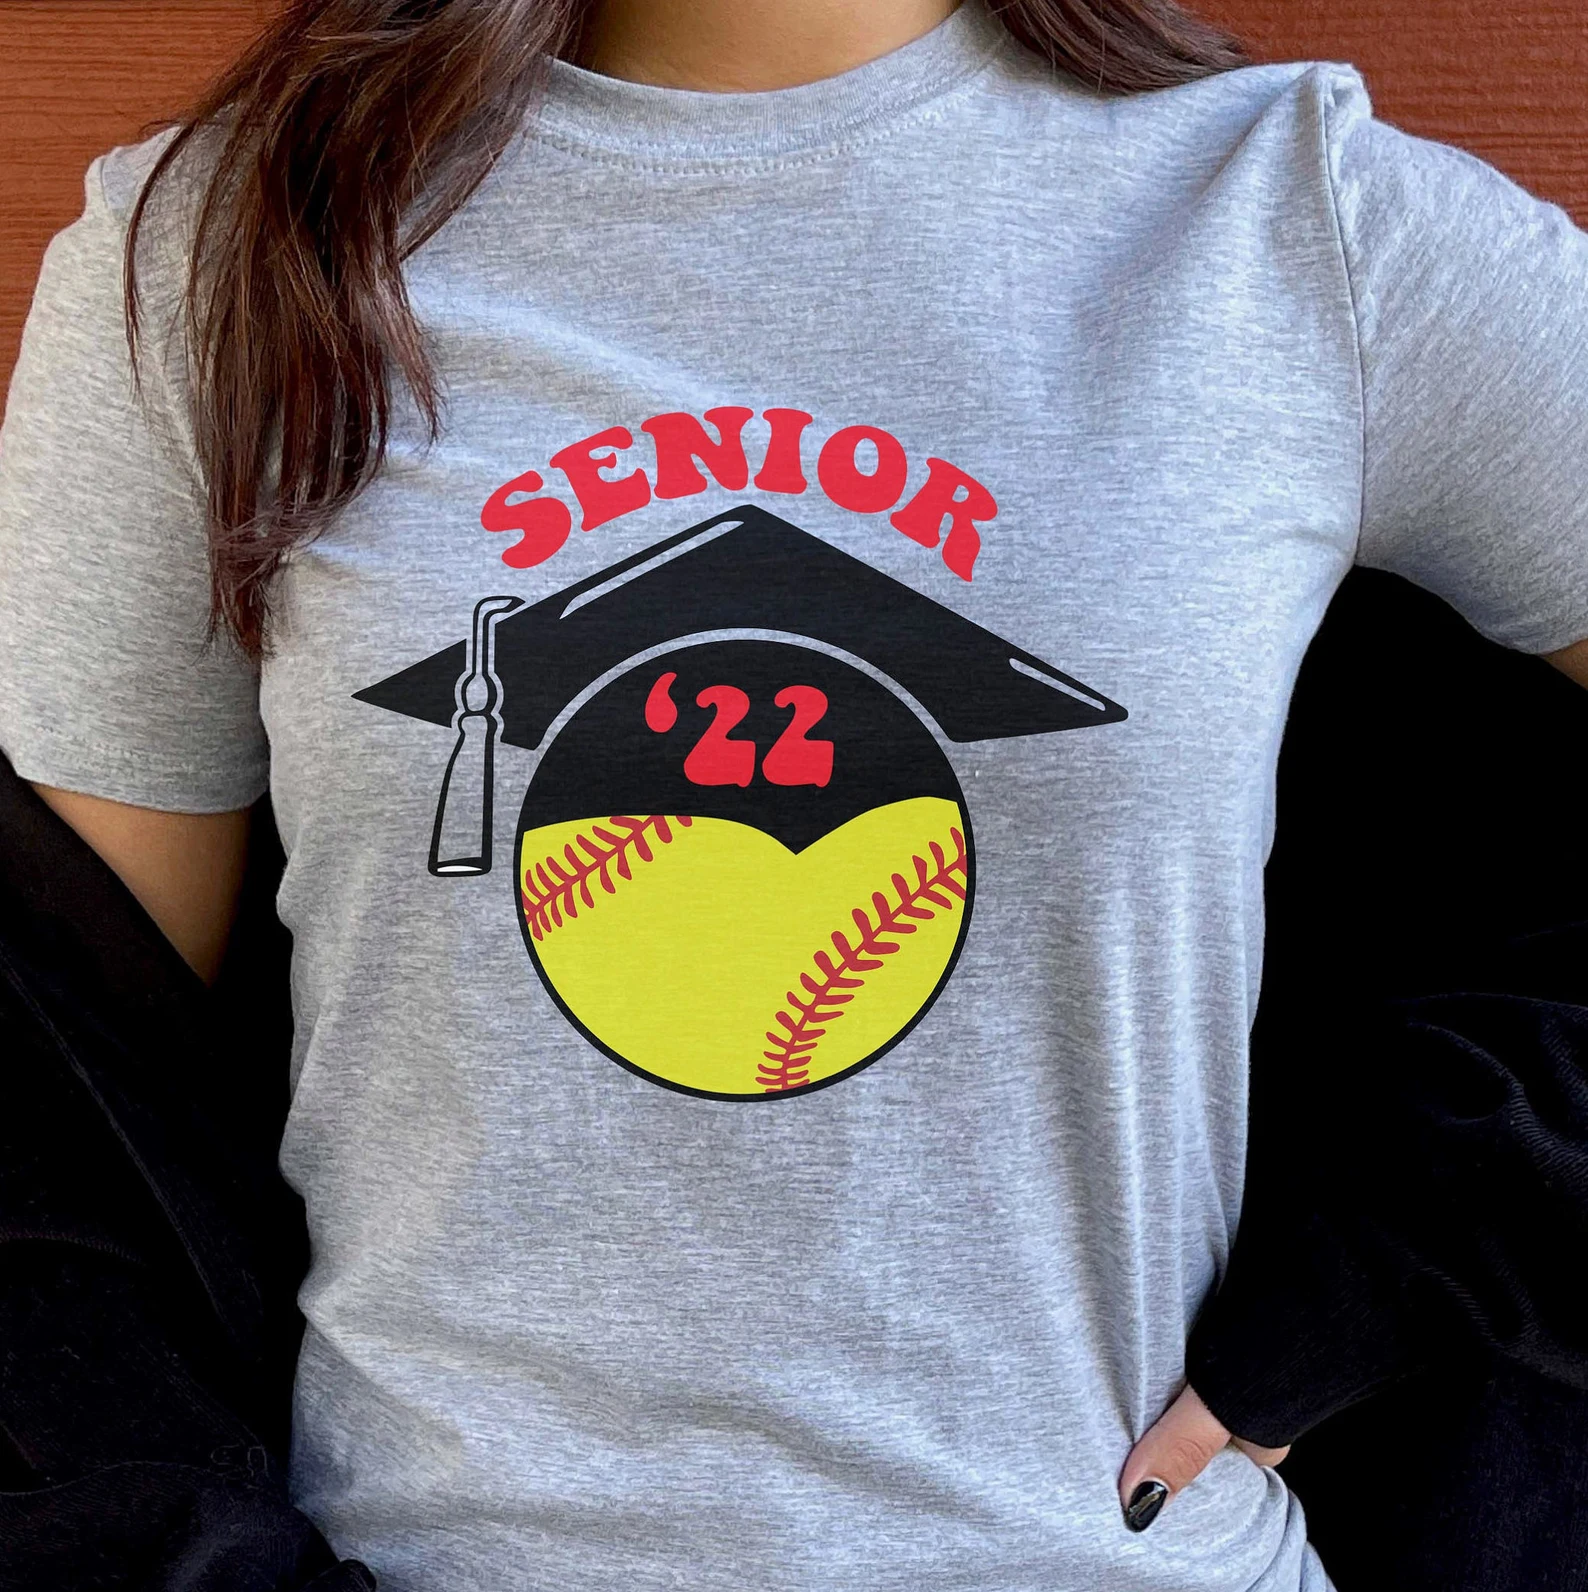 Every softball player will feel special on Senior night with custom t-shirts. Find yours online on Etsy.com or make your own!